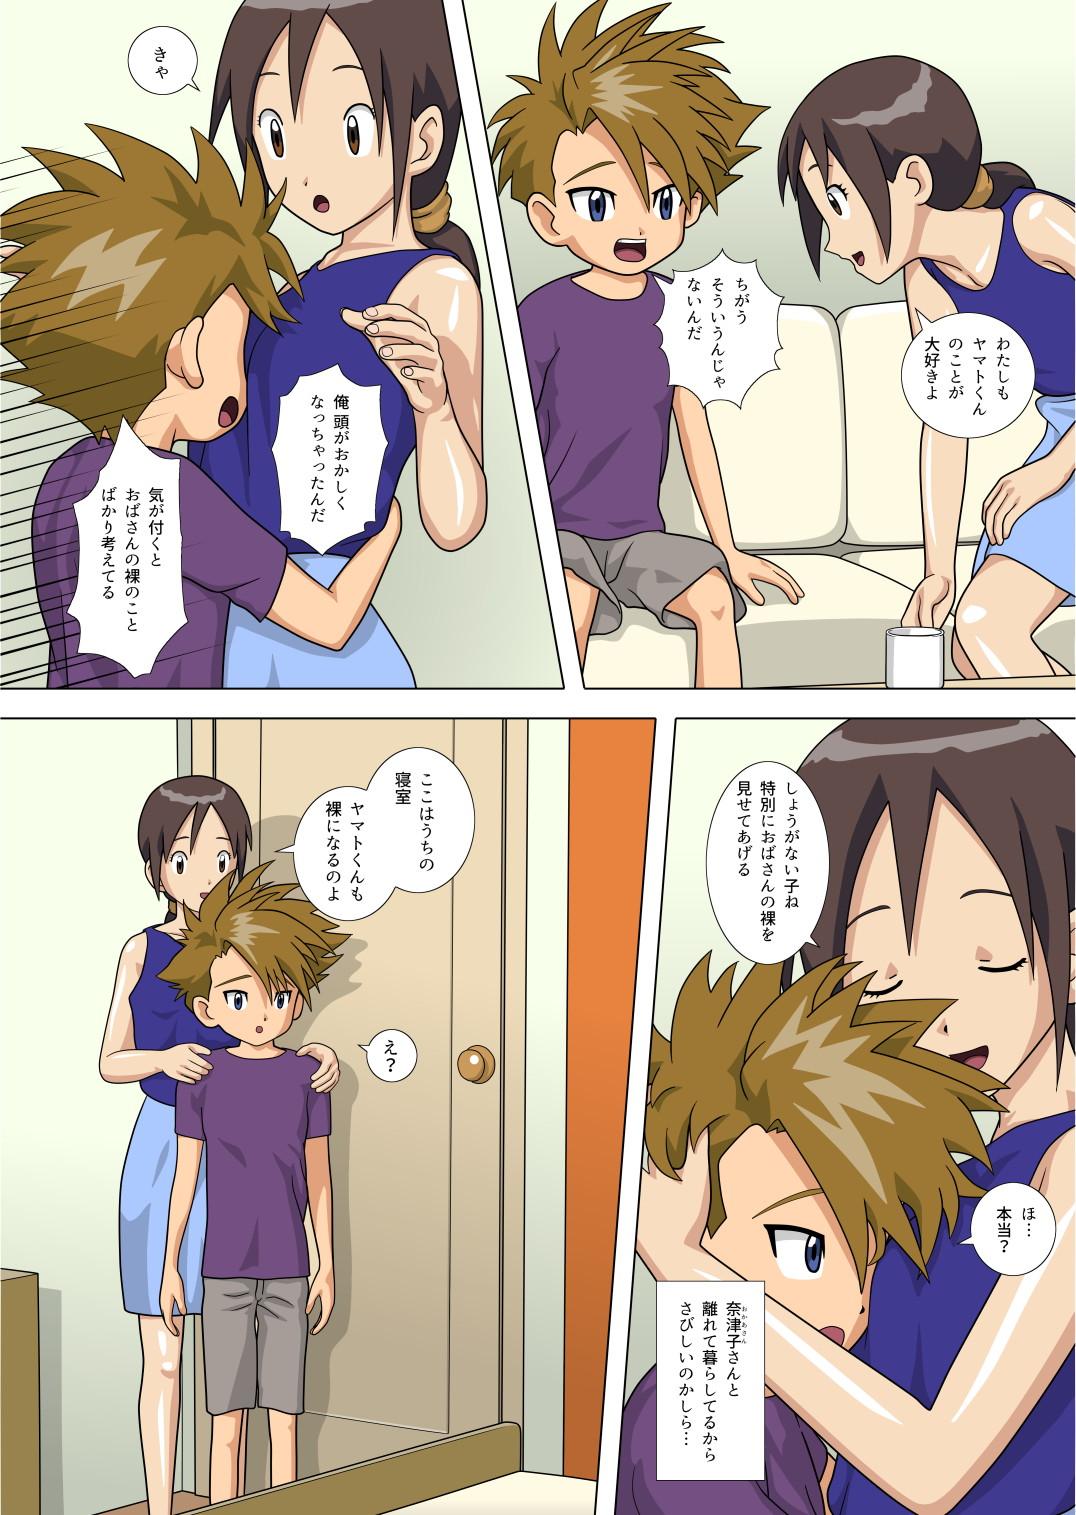 Bra Friend's mother teaches me how to sex. - Digimon adventure Digimon Beautiful - Page 3